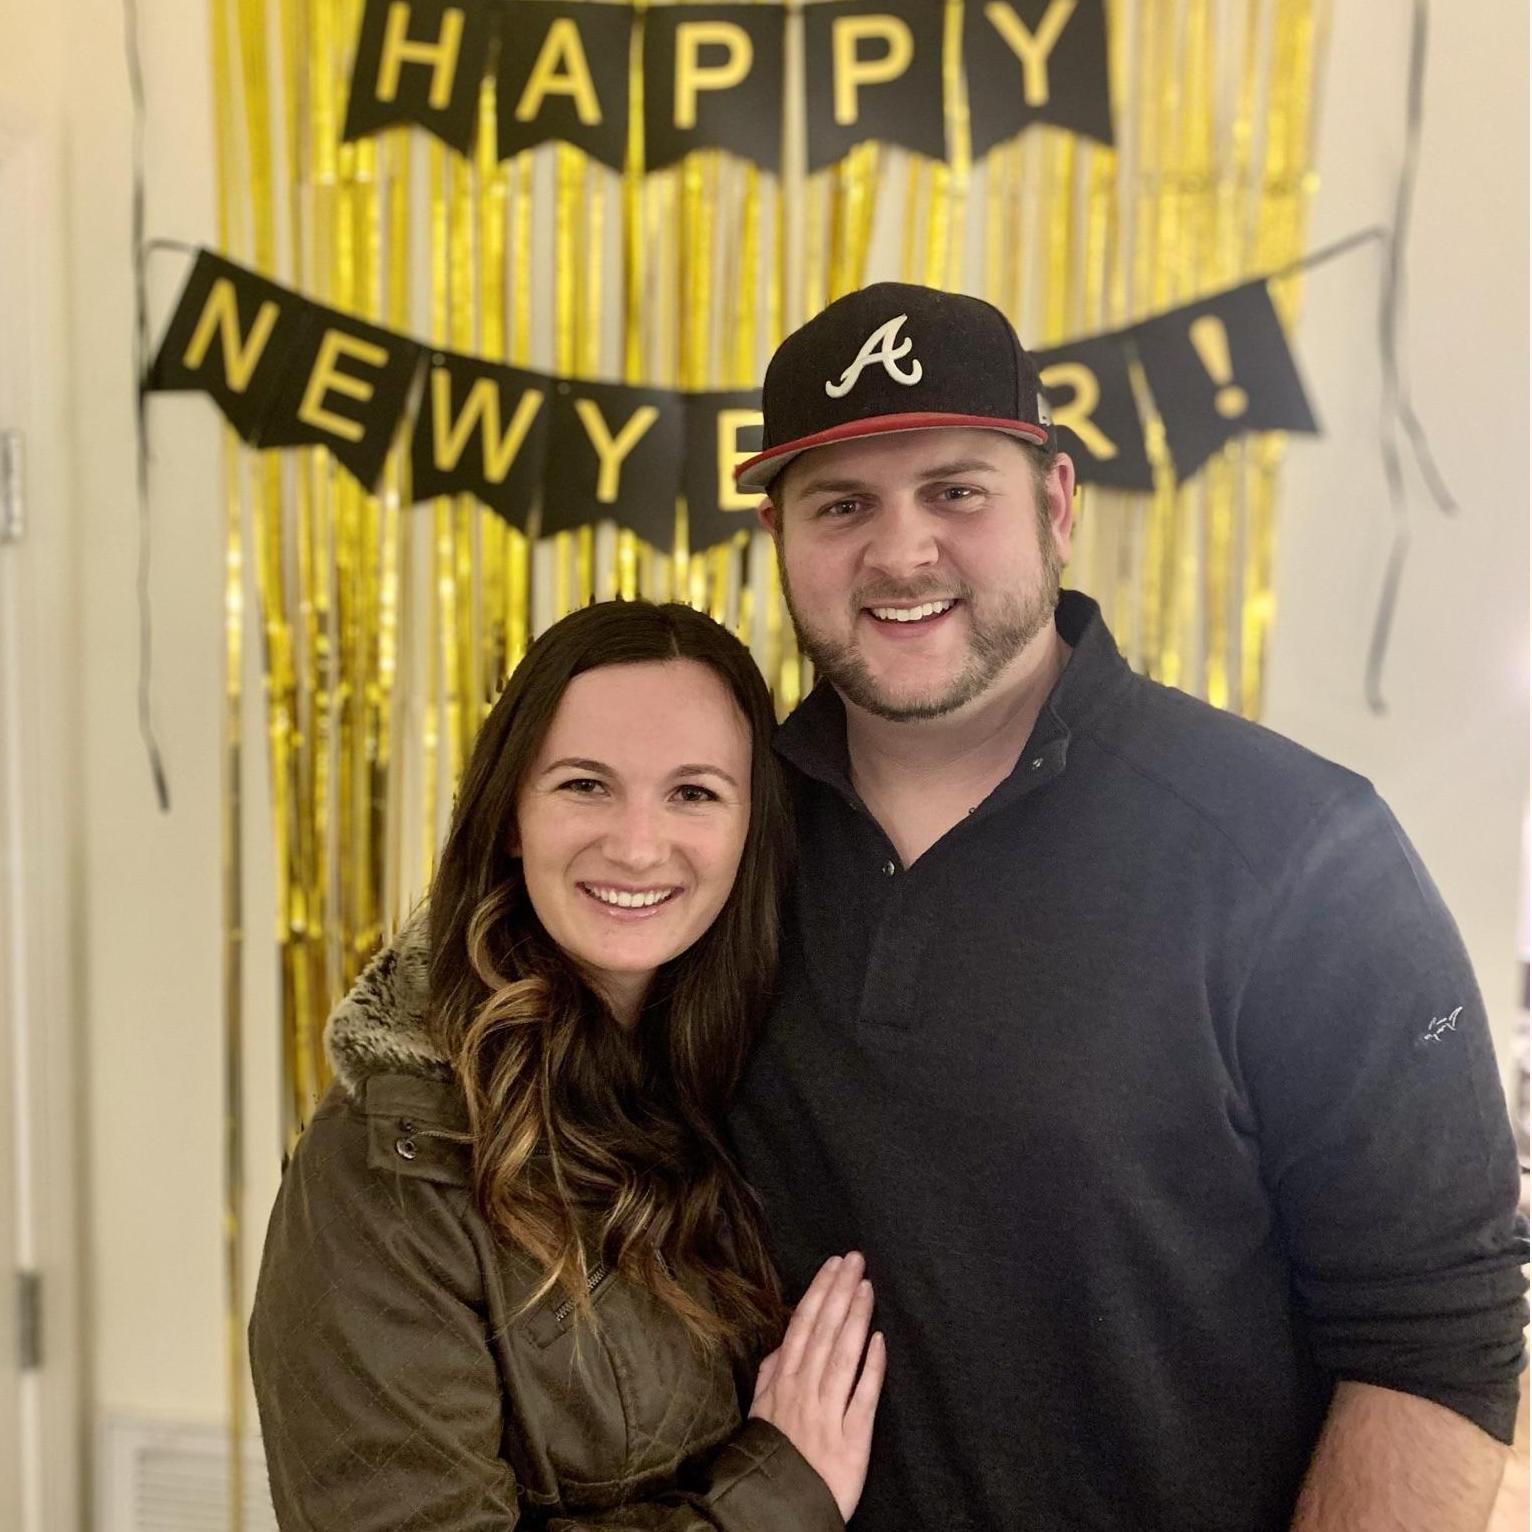 In December 2020, Michael Hancock (Michael introduced Colt & I) moved to Nashville. We celebrated New Year's Eve with him & Katie at their new townhome.